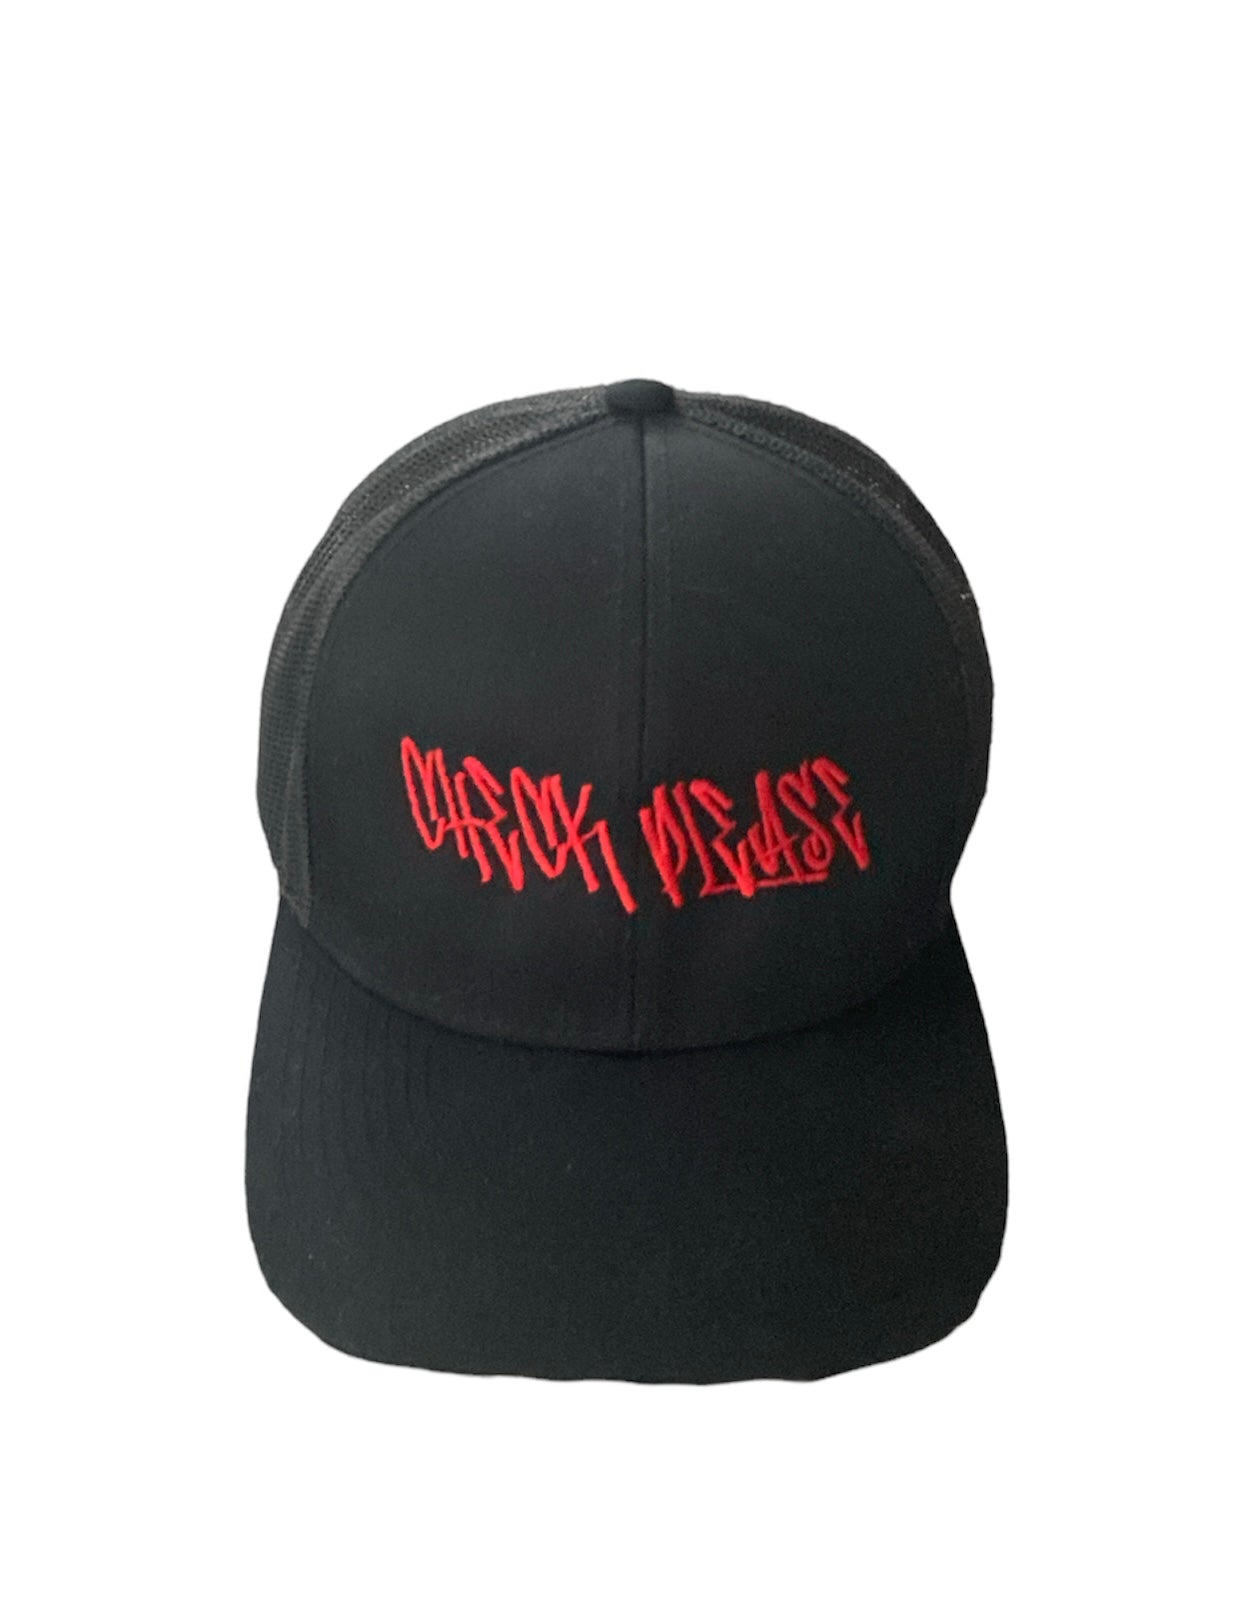 Check Please Clothing embroidered hat